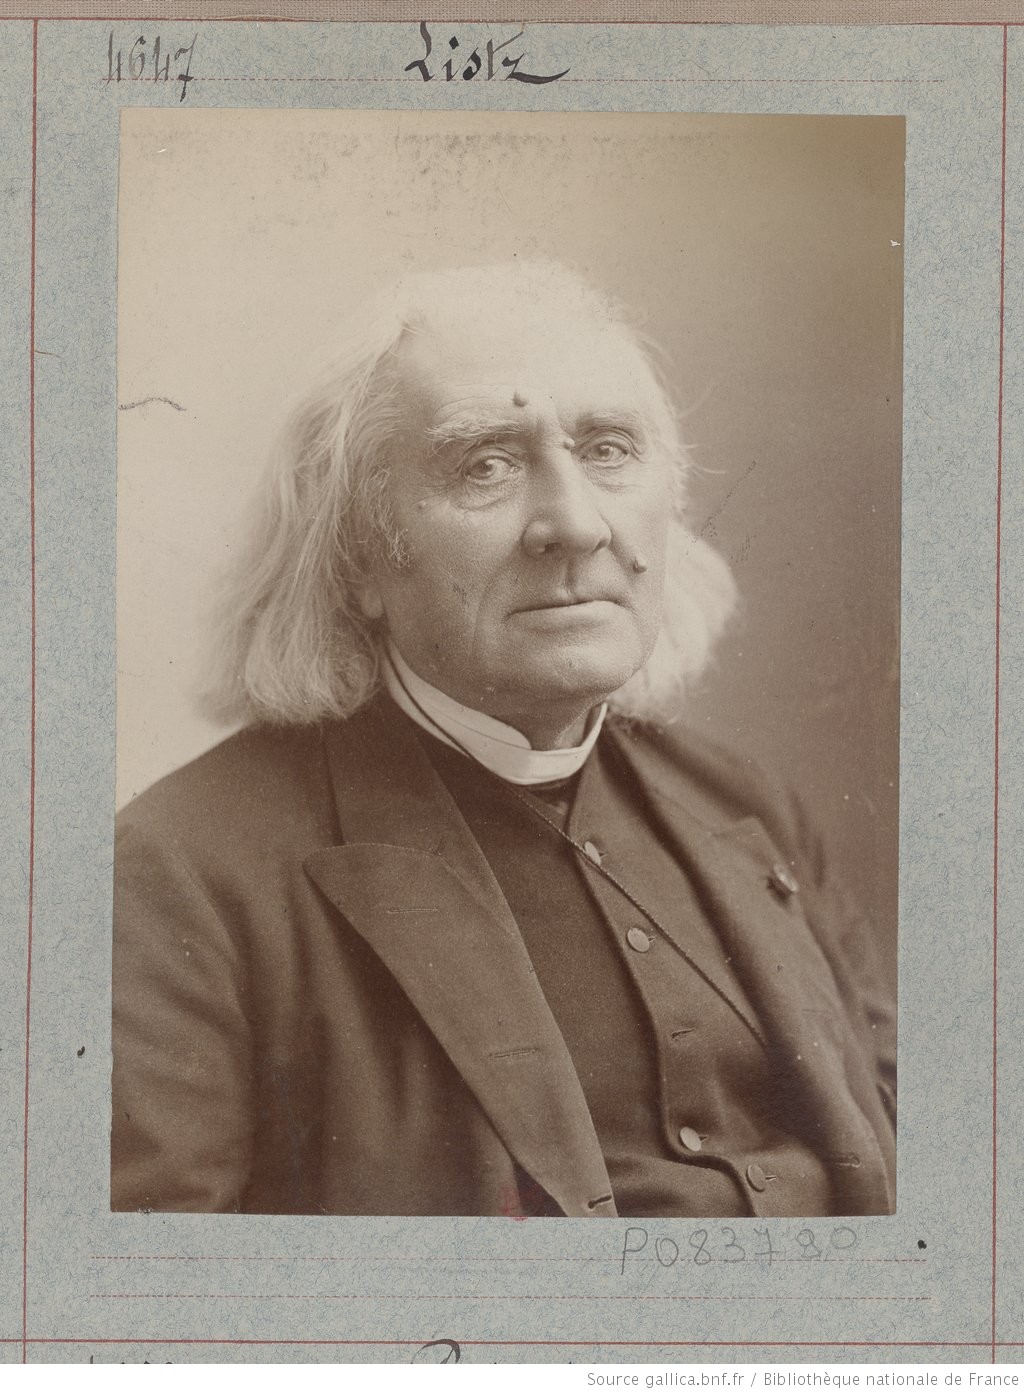 Liszt portrait number 8 in black and white taken by Nadar